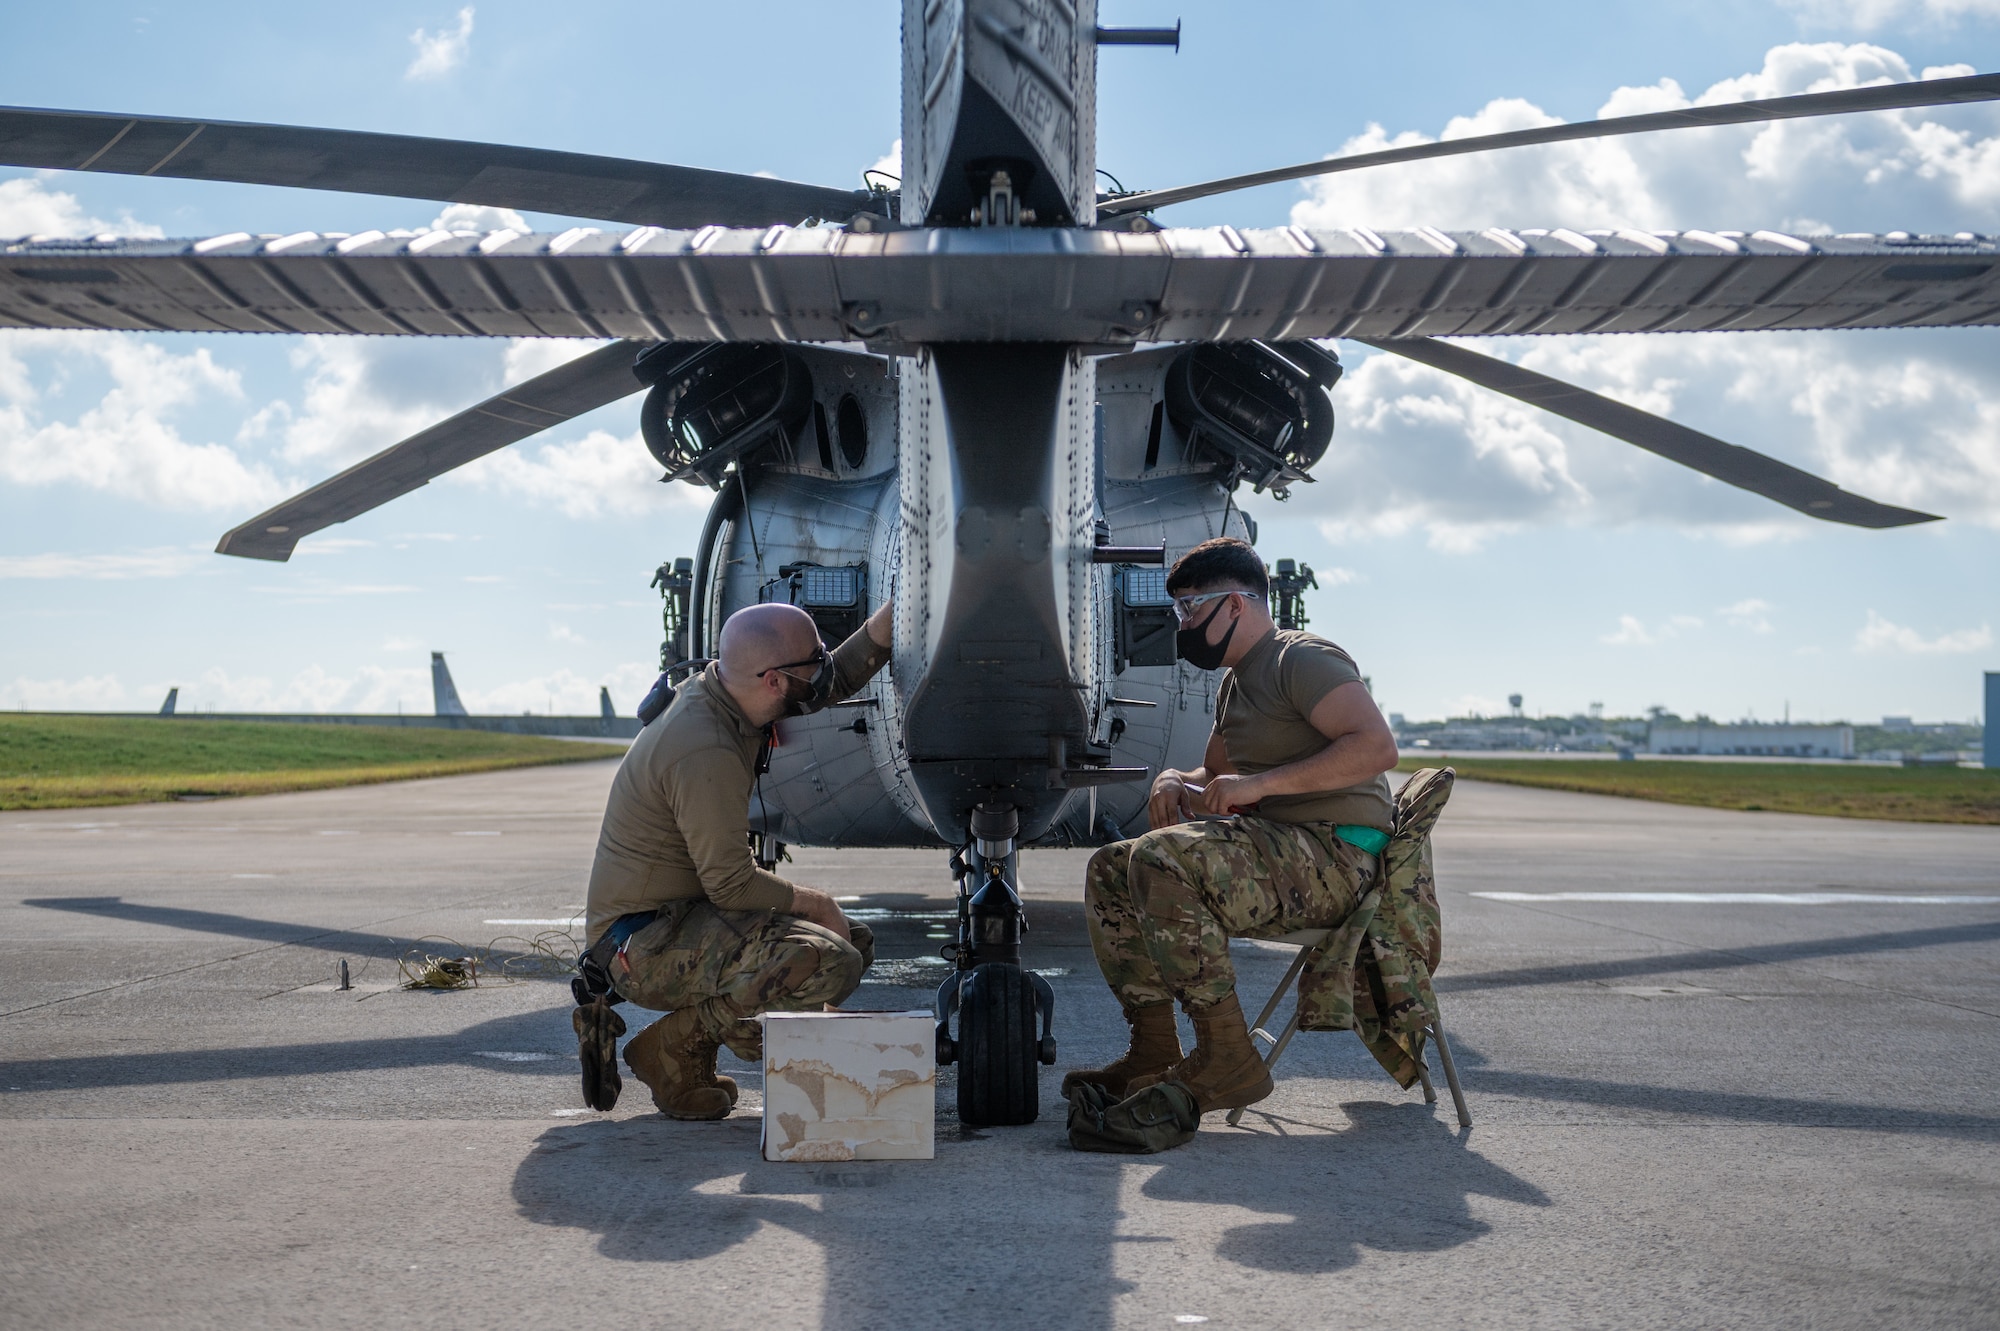 Two Airmen performing maintenance on a helicopter